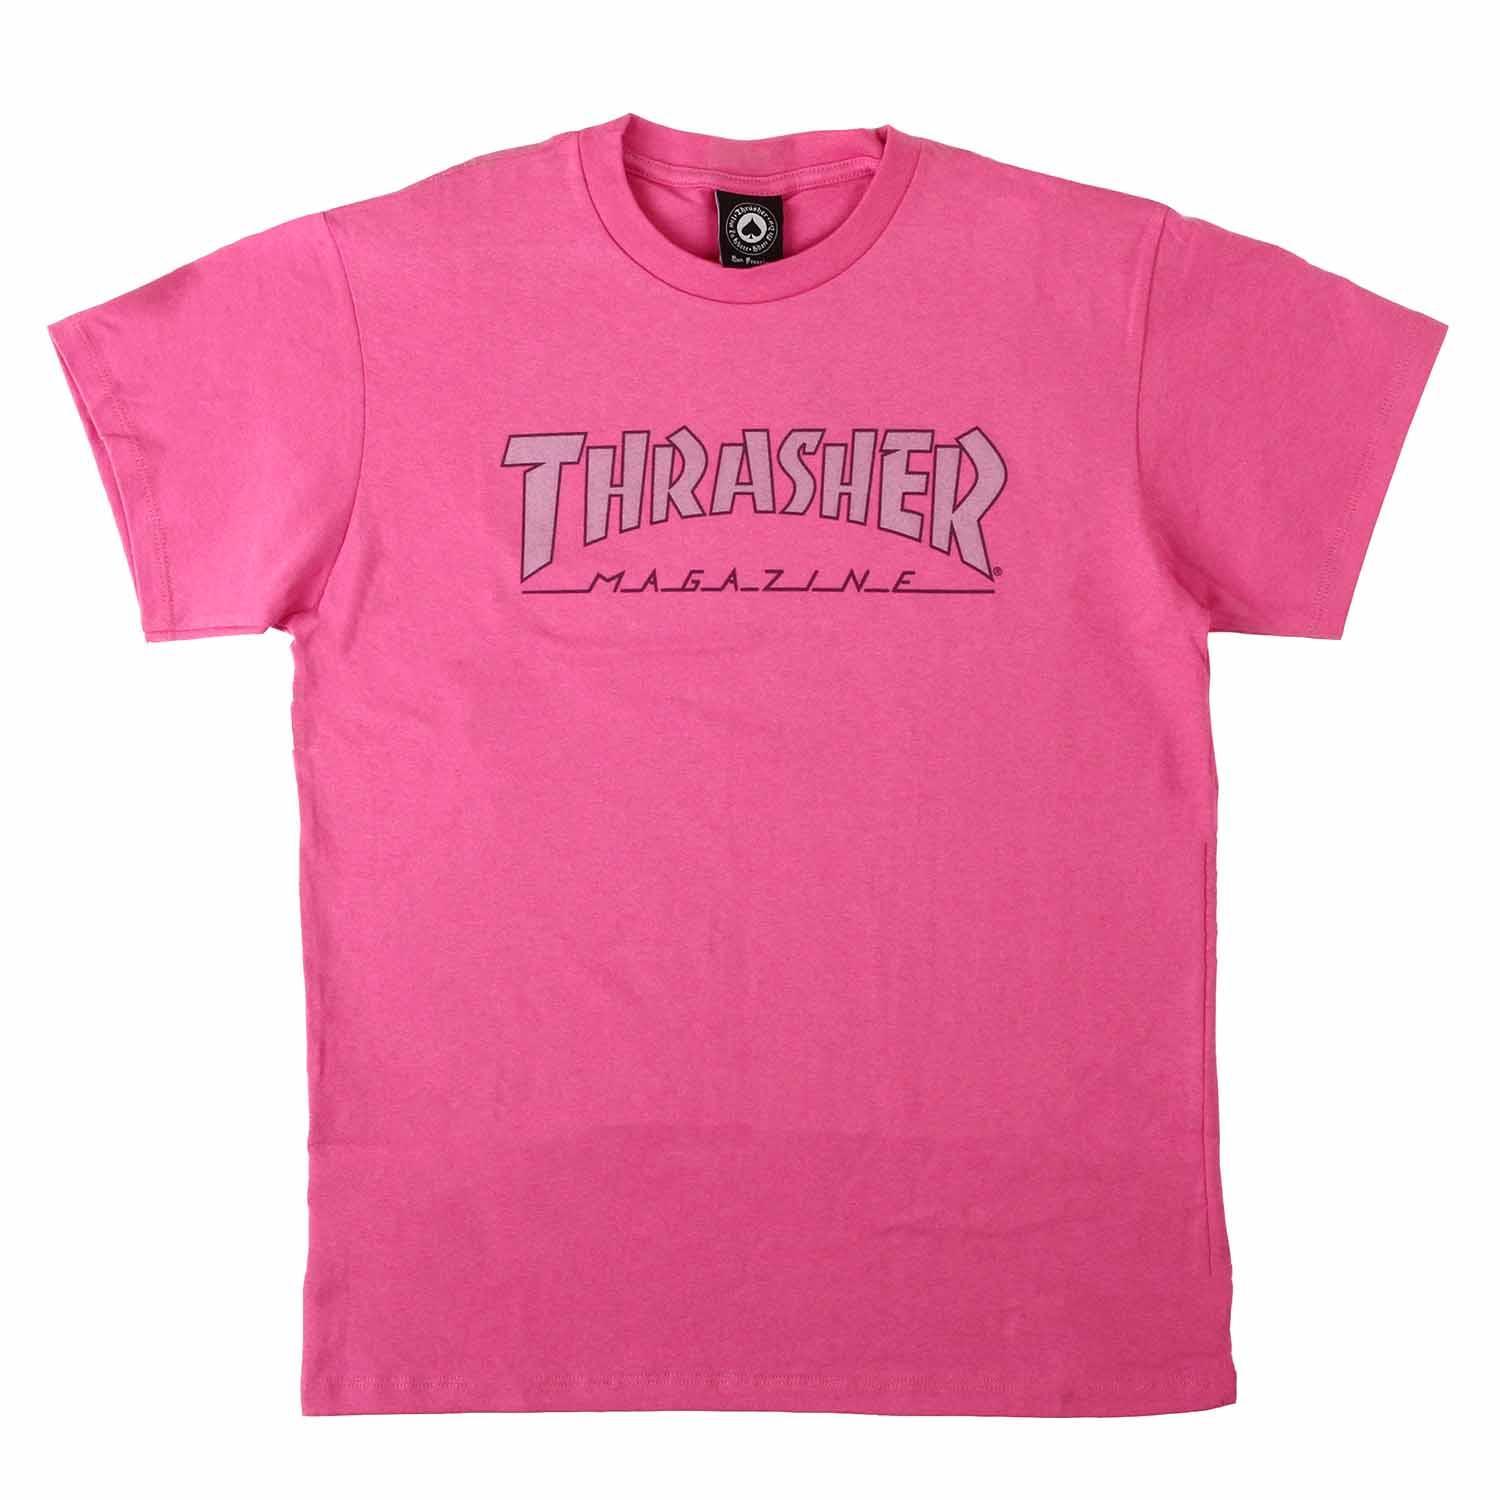 Remera Thrasher Outline Rosa - Indy